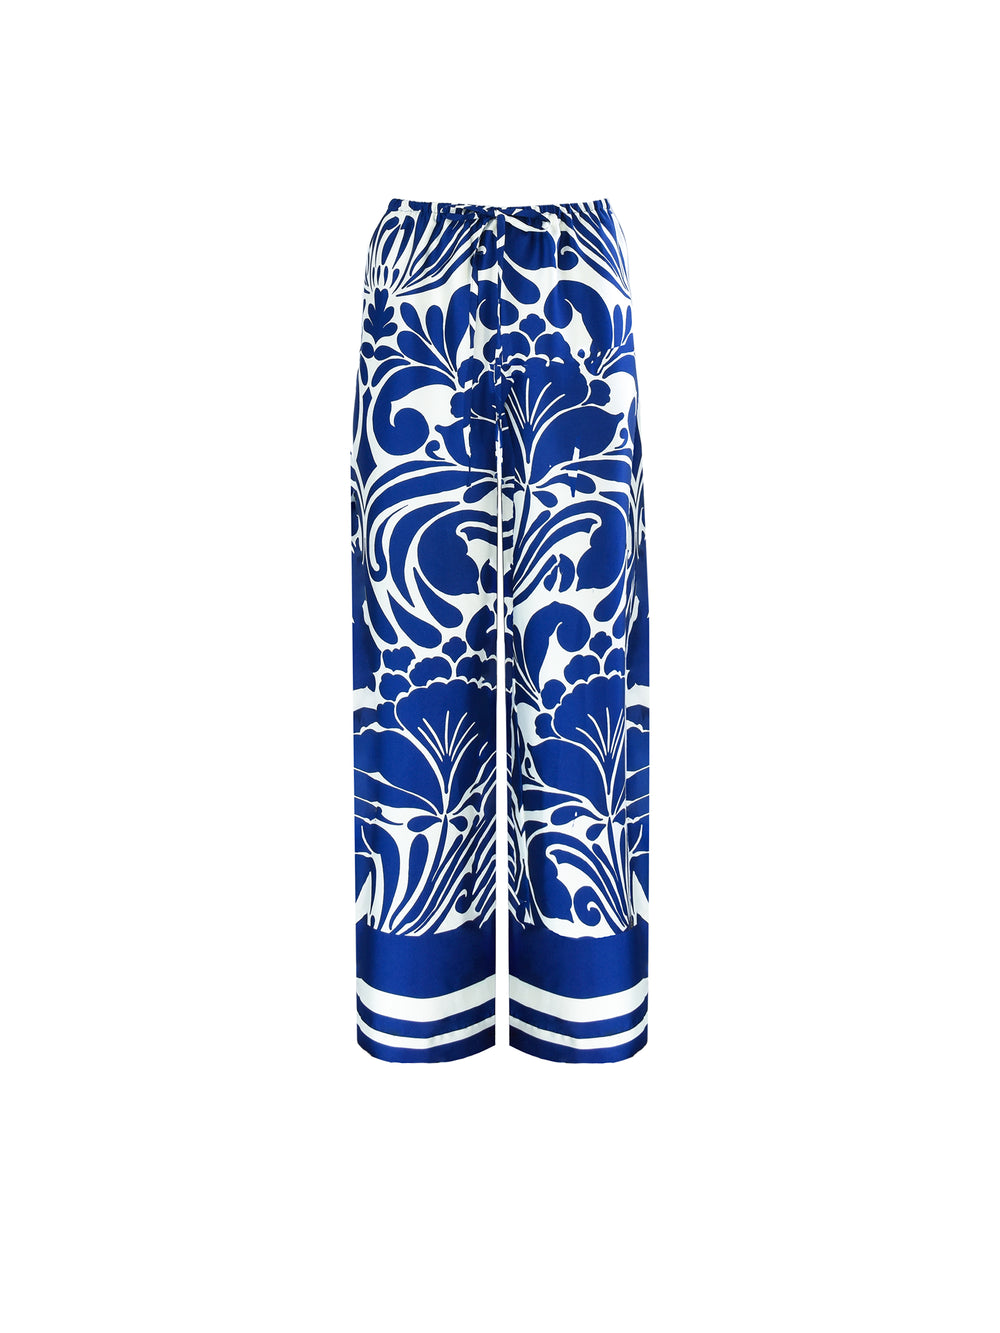 Oui Paisley Print Wide Leg Trousers - Trousers from Shirt Sleeves UK